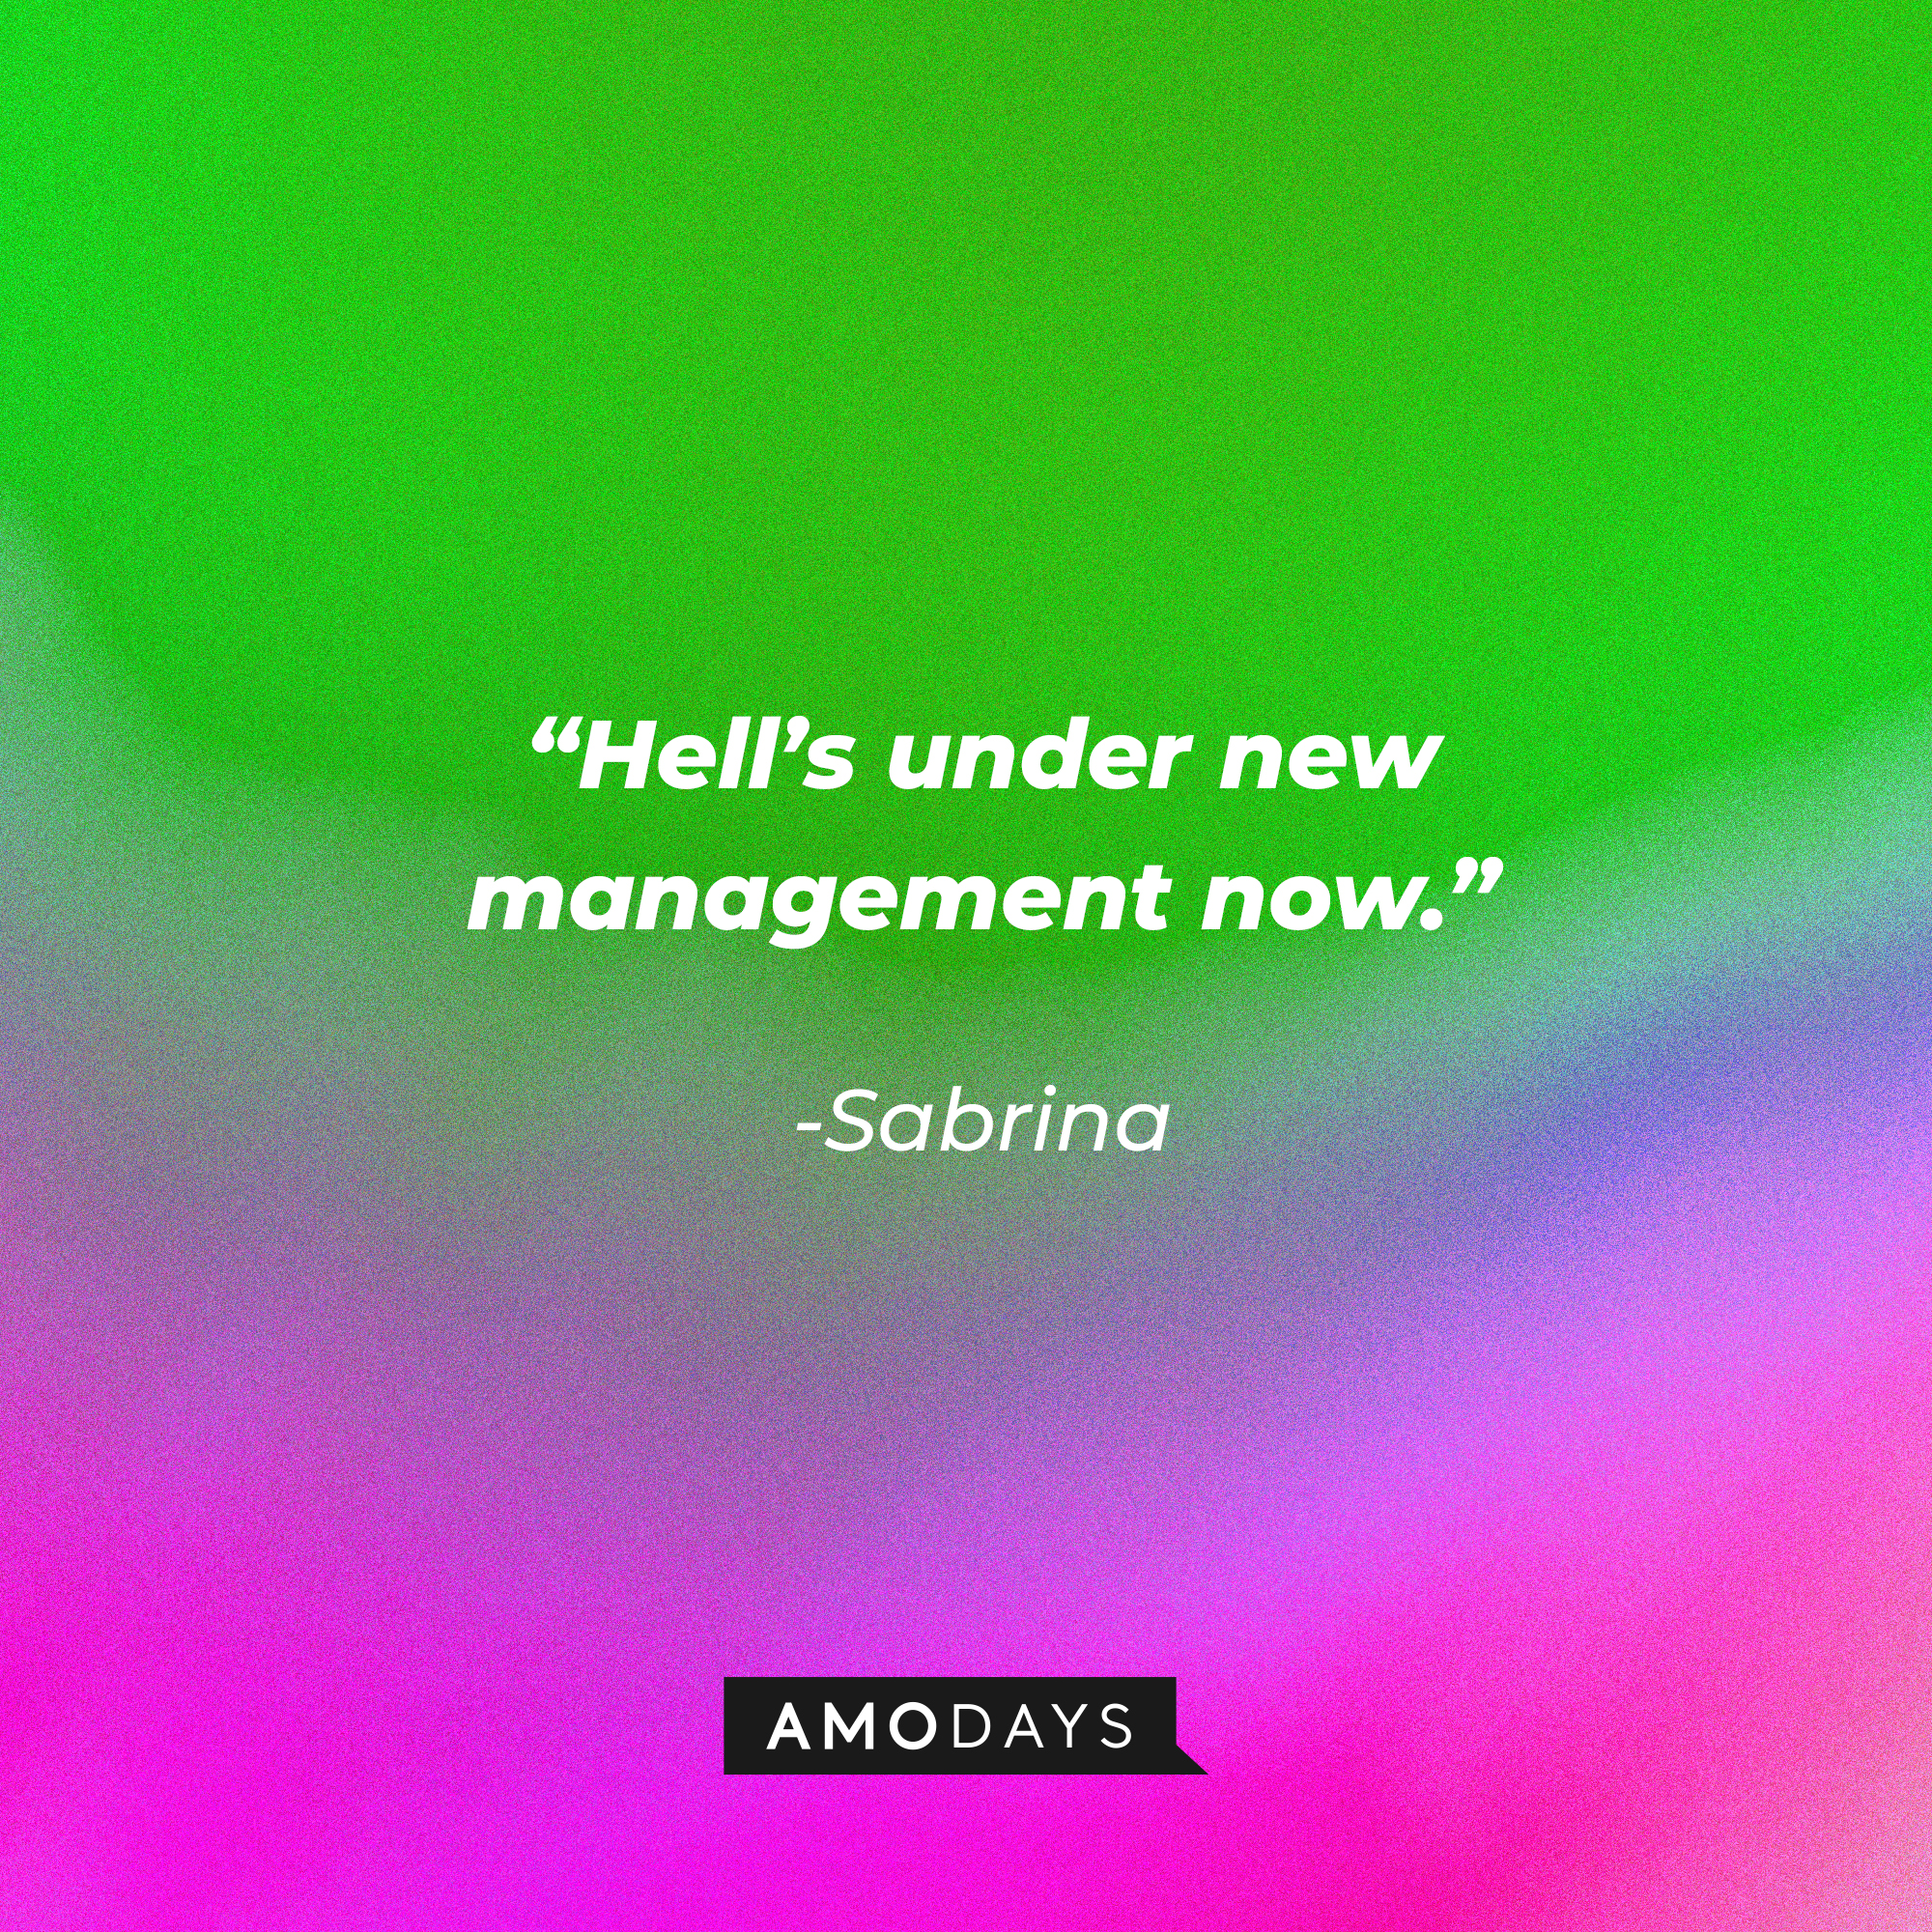 Sabrina's quote: ”Hell’s under new management now.” | Source: Amodays